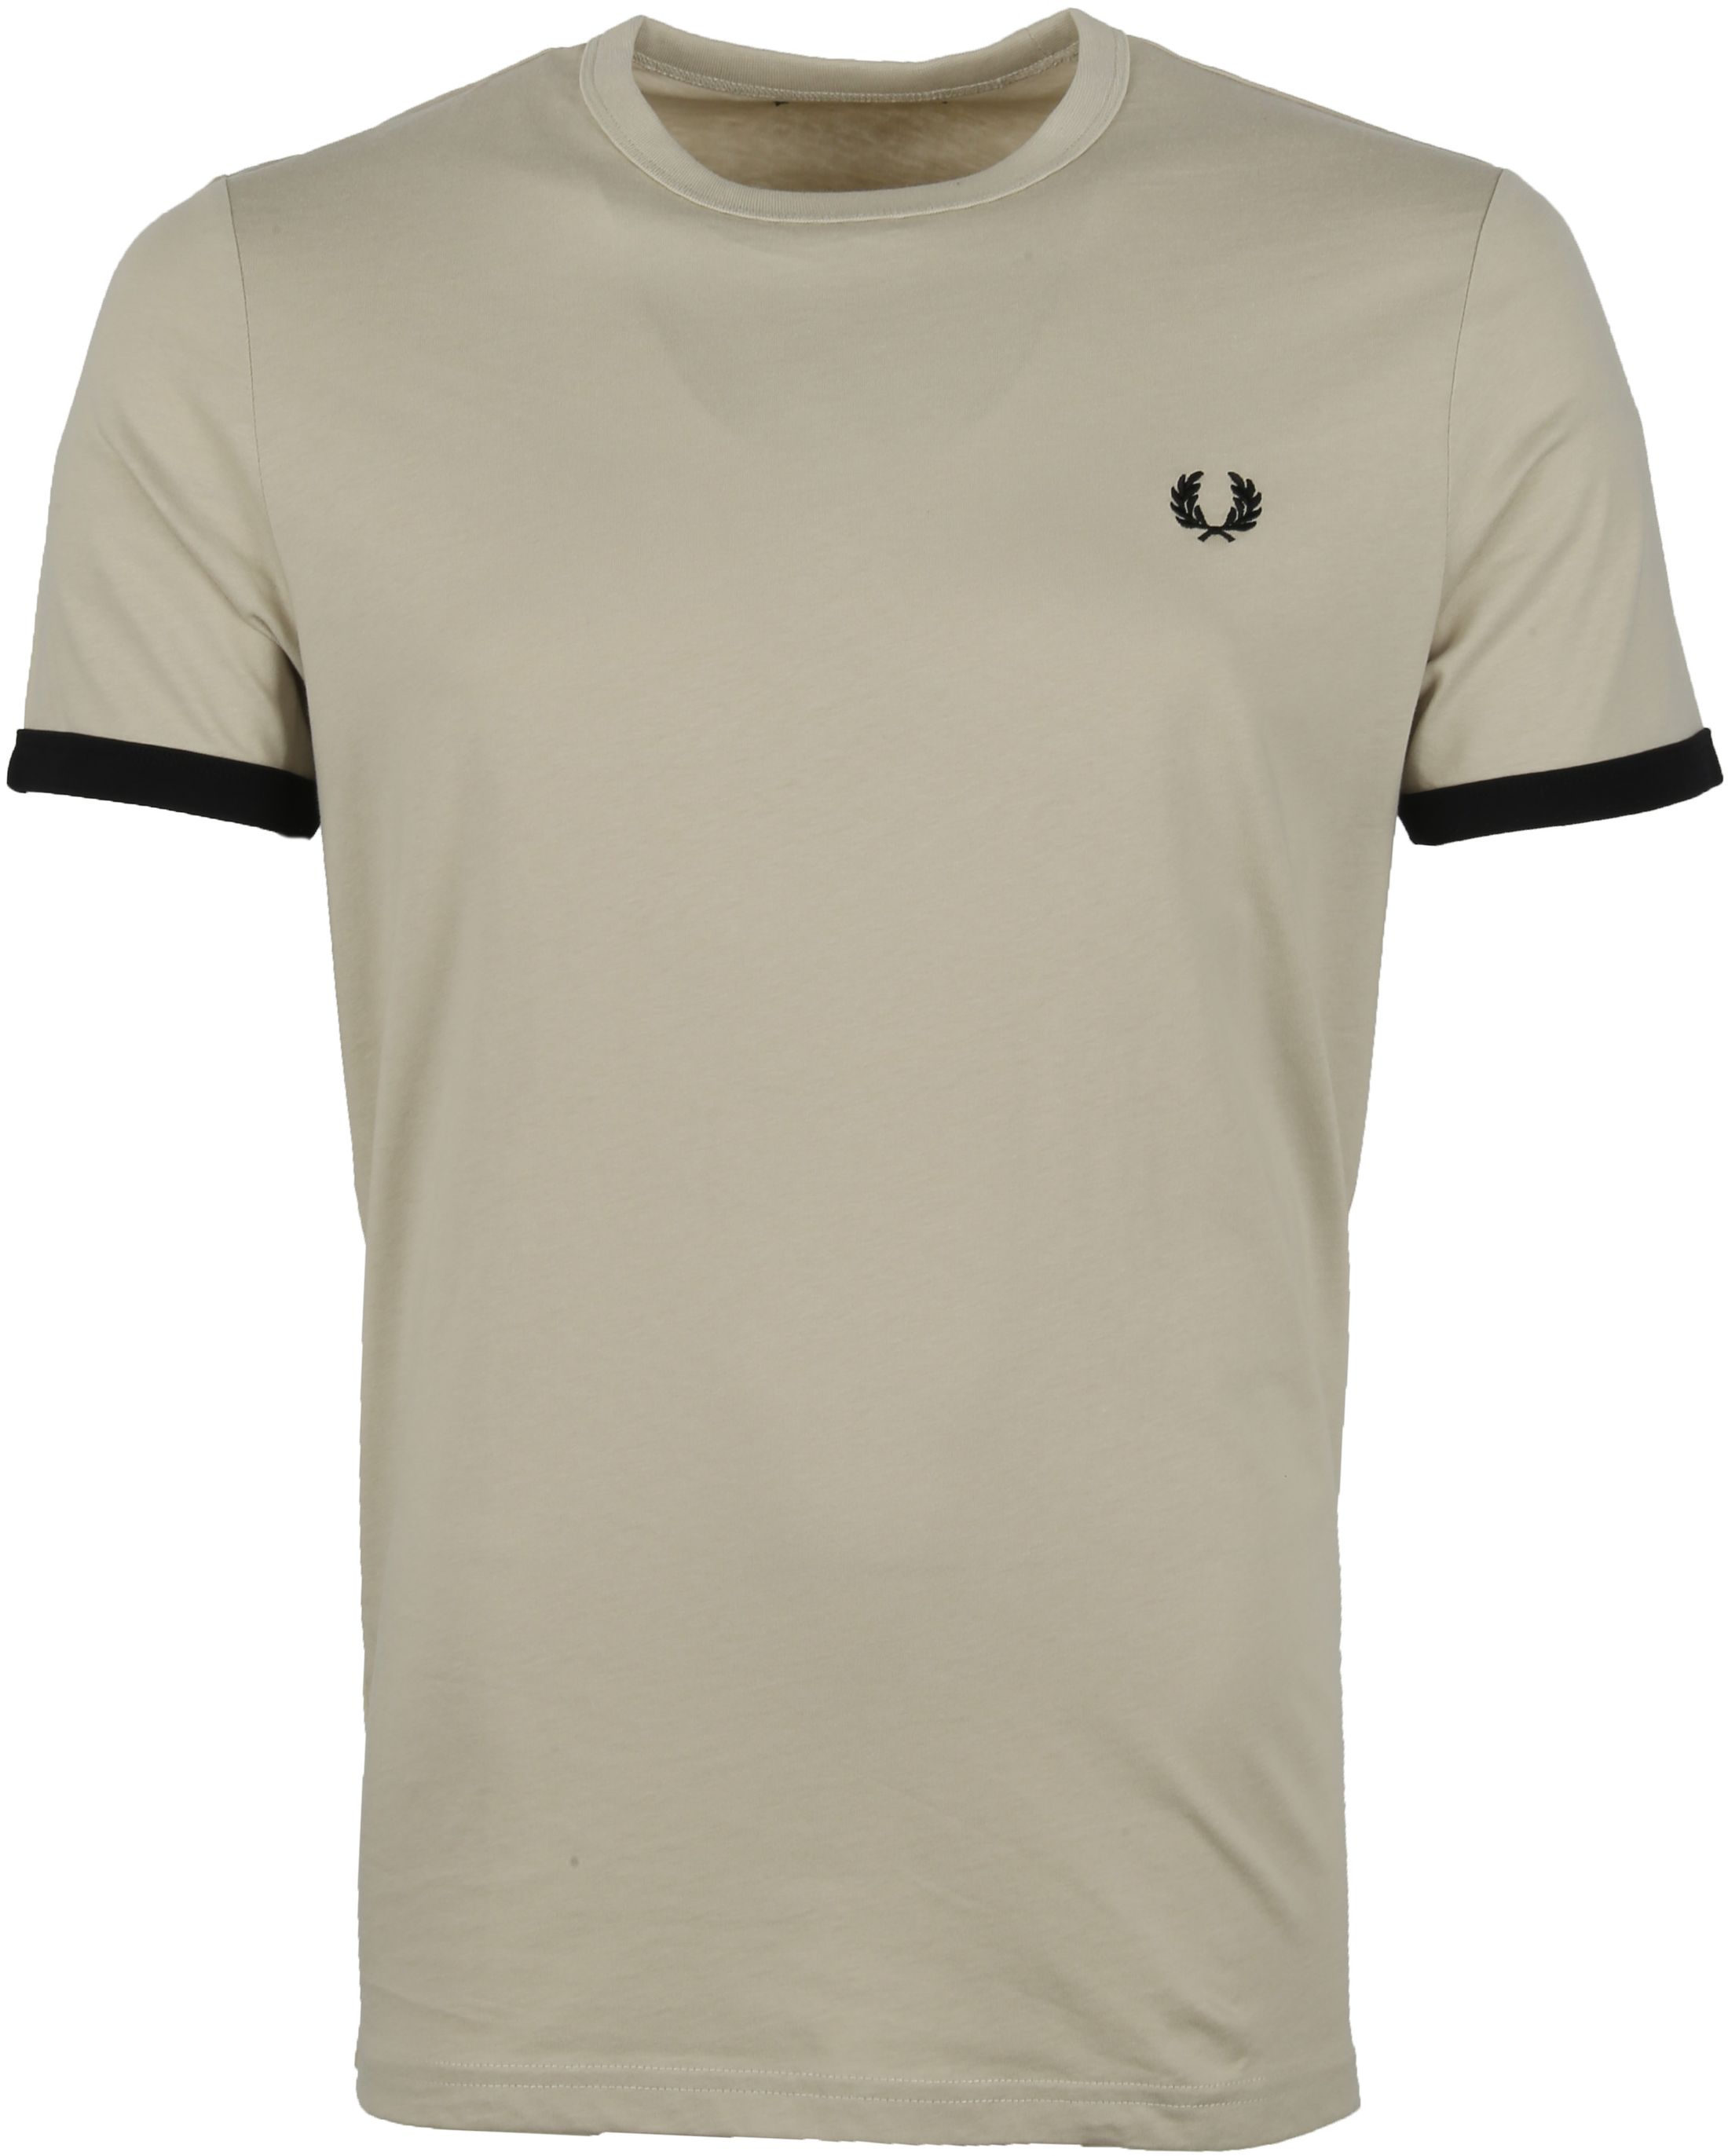 Fred Perry Ringer T-Shirt Beige size L